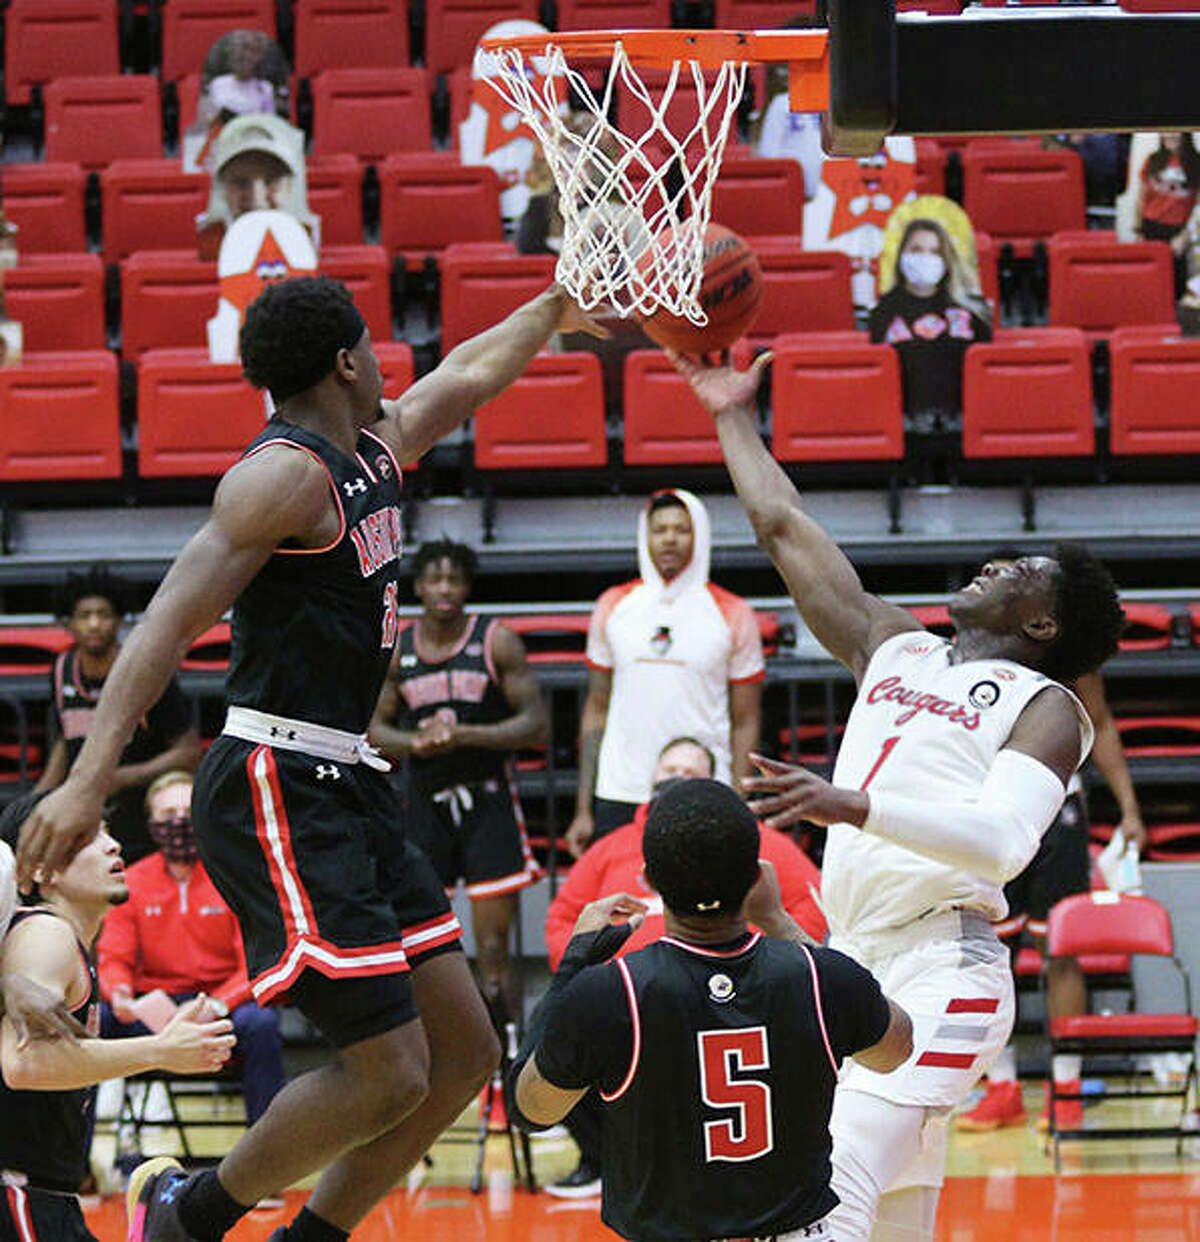 SIUE’s Mike Adewunmi (1) extends to get a shot off over Austin Peay’s Terry Taylor (left) while Jordyn Adams (5) watches the play Monday in Edwardsville.